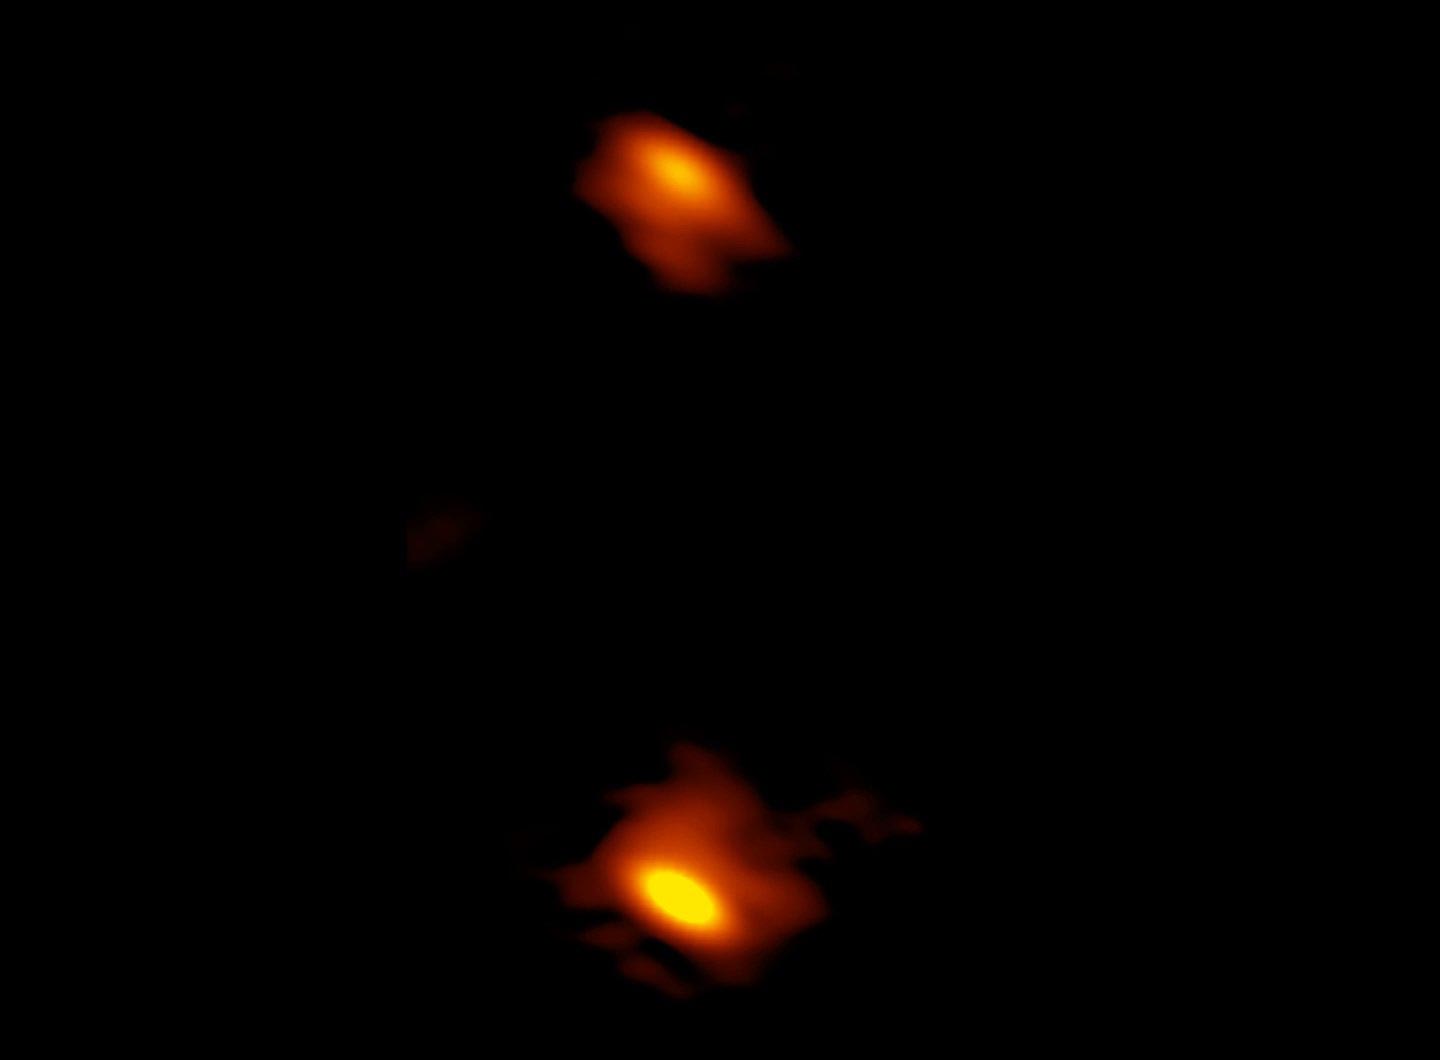 This image taken by VLBA shows two supermassive black holes, which appear as blobs with red streaks. Black holes are at the center of an elliptical galaxy. The colors represent different spectral gradients in radio emission, with red showing the densest regions around the black holes. The black hole on the right must have recently devoured a massive star, causing it to emit two very fast jets. The edges of these jets appear as green spots above and below the black hole. This object, named J0405+3803, is called a CSO because its jets are relatively close (or compact) compared to other black holes with much larger jets. Credit: HL Maness/Grinnell College